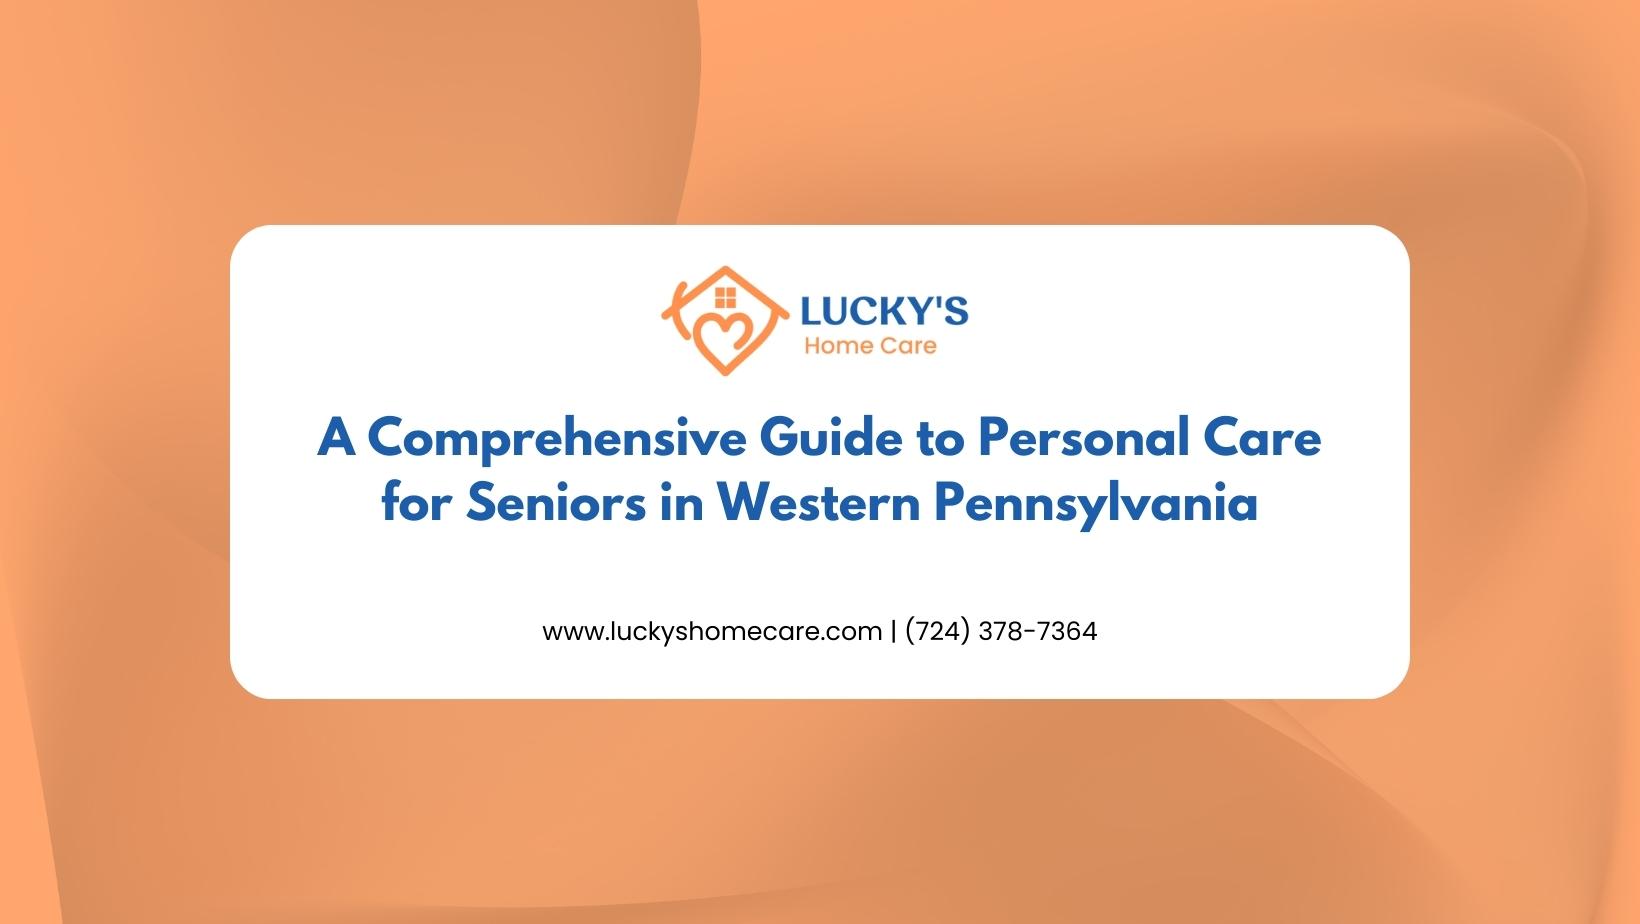 A Comprehensive Guide to Personal Care for Seniors in Western Pennsylvania